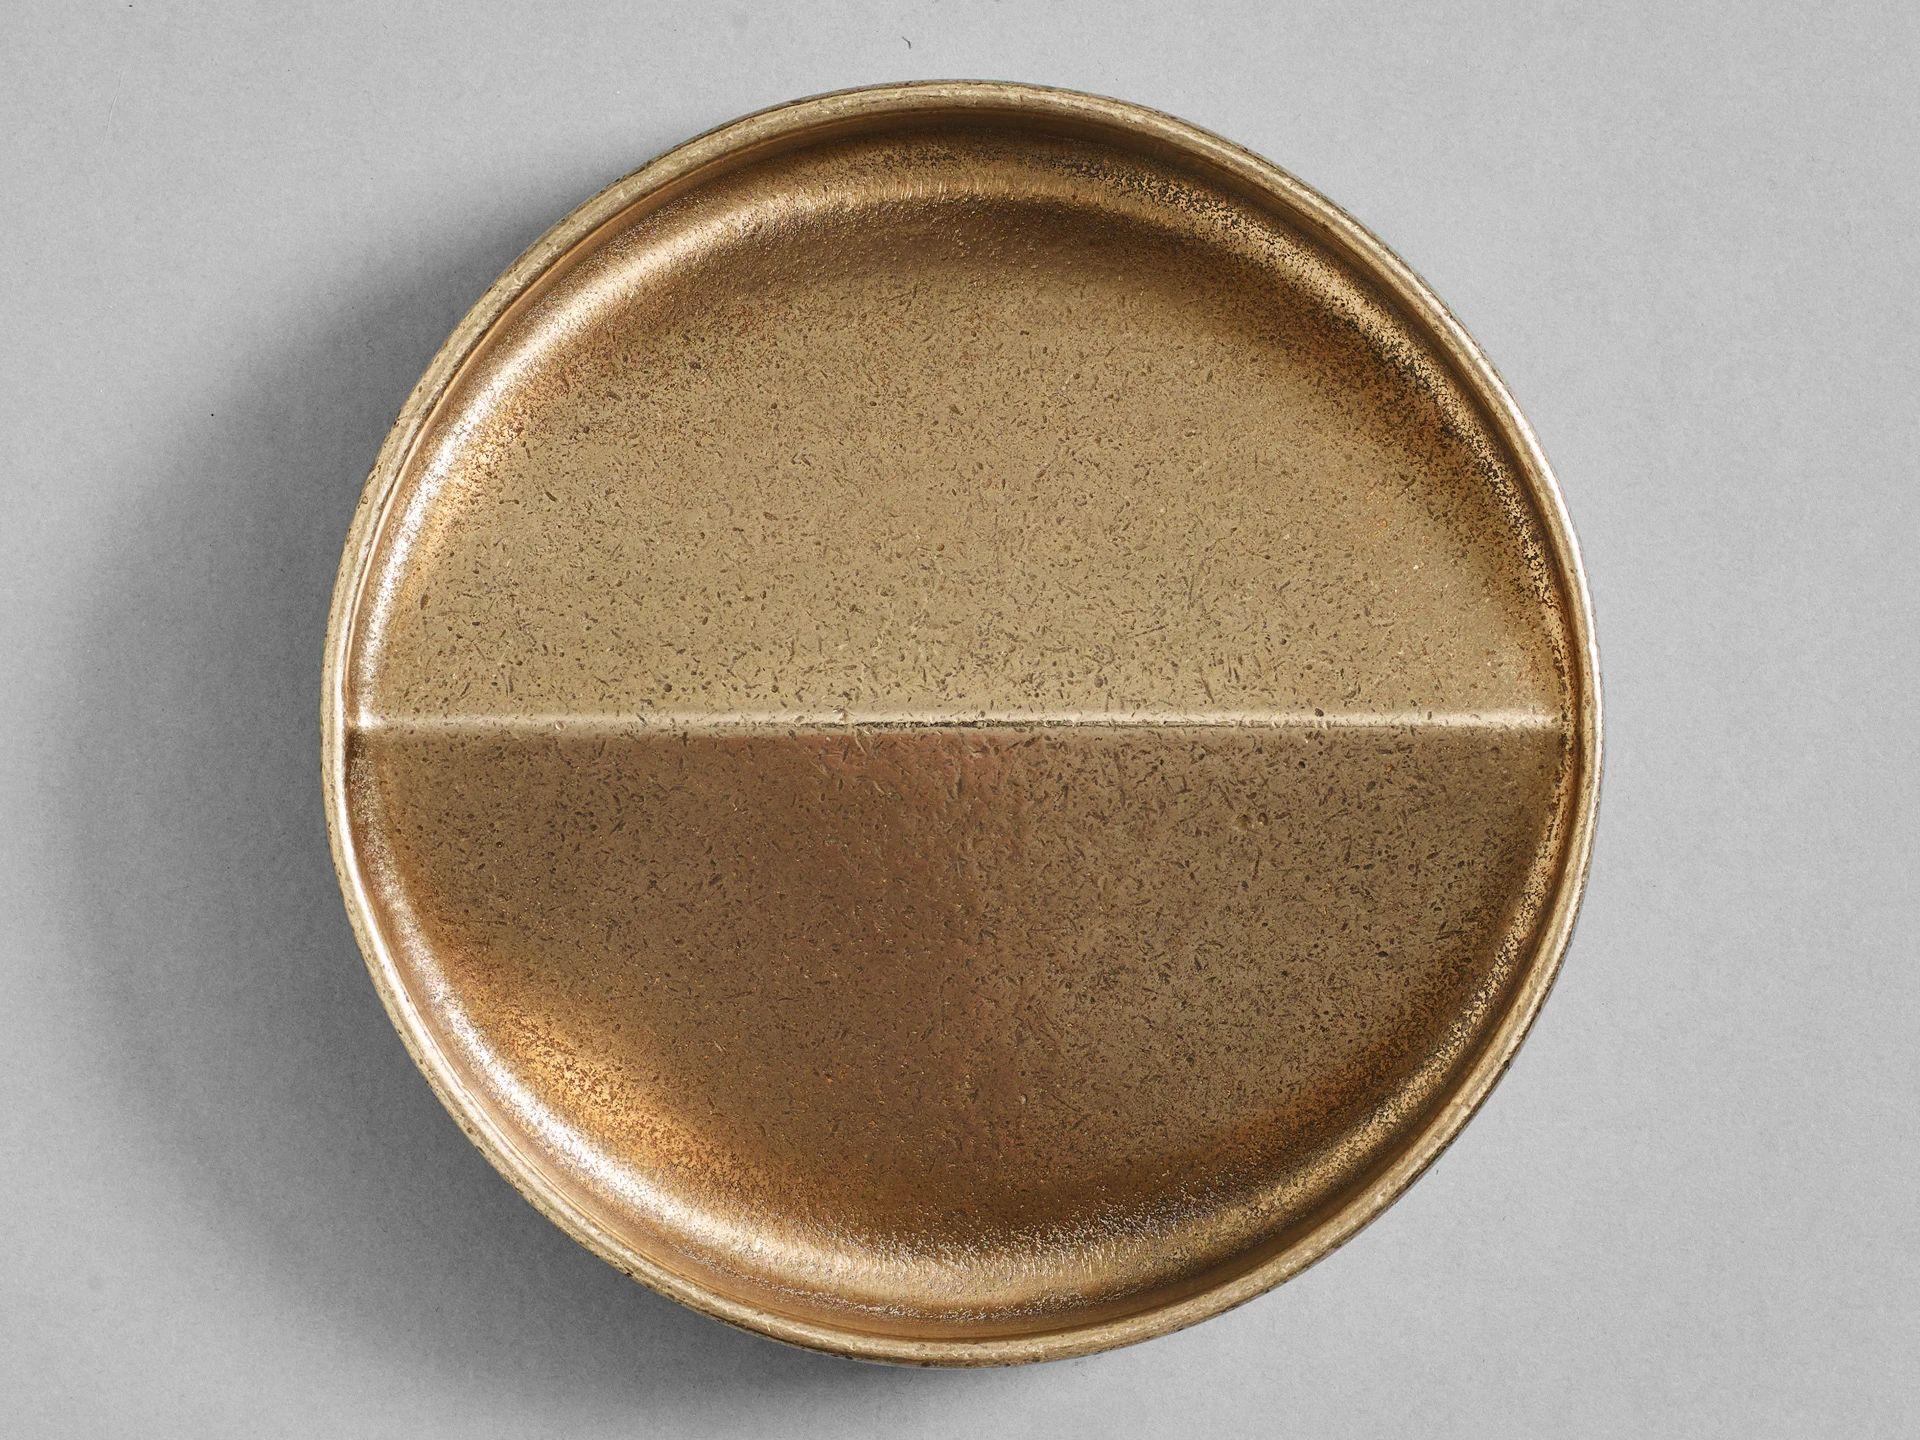 Bronze Vide Poche Rond XL by Henry Wilson
Dimensions: D 18 x H 4 cm 
Materials: Bronze

Your Vide Poche is designed with your loose-pocket items in mind – think keys, change and phone. It is made, polished and finished in Sydney, Australia in solid